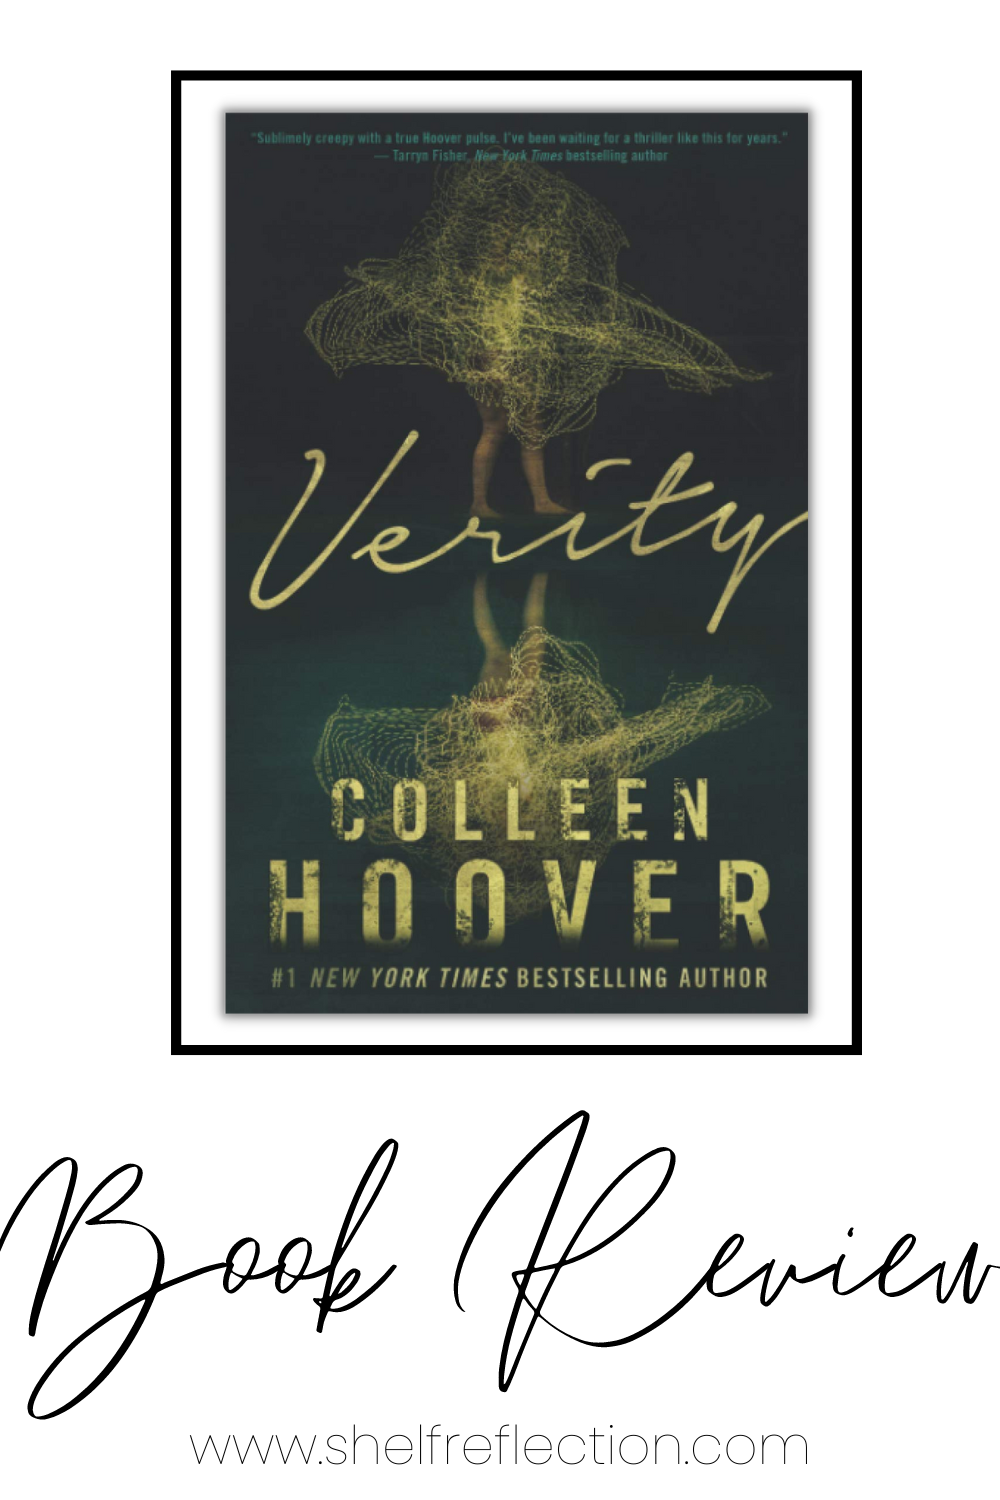 book review verity colleen hoover